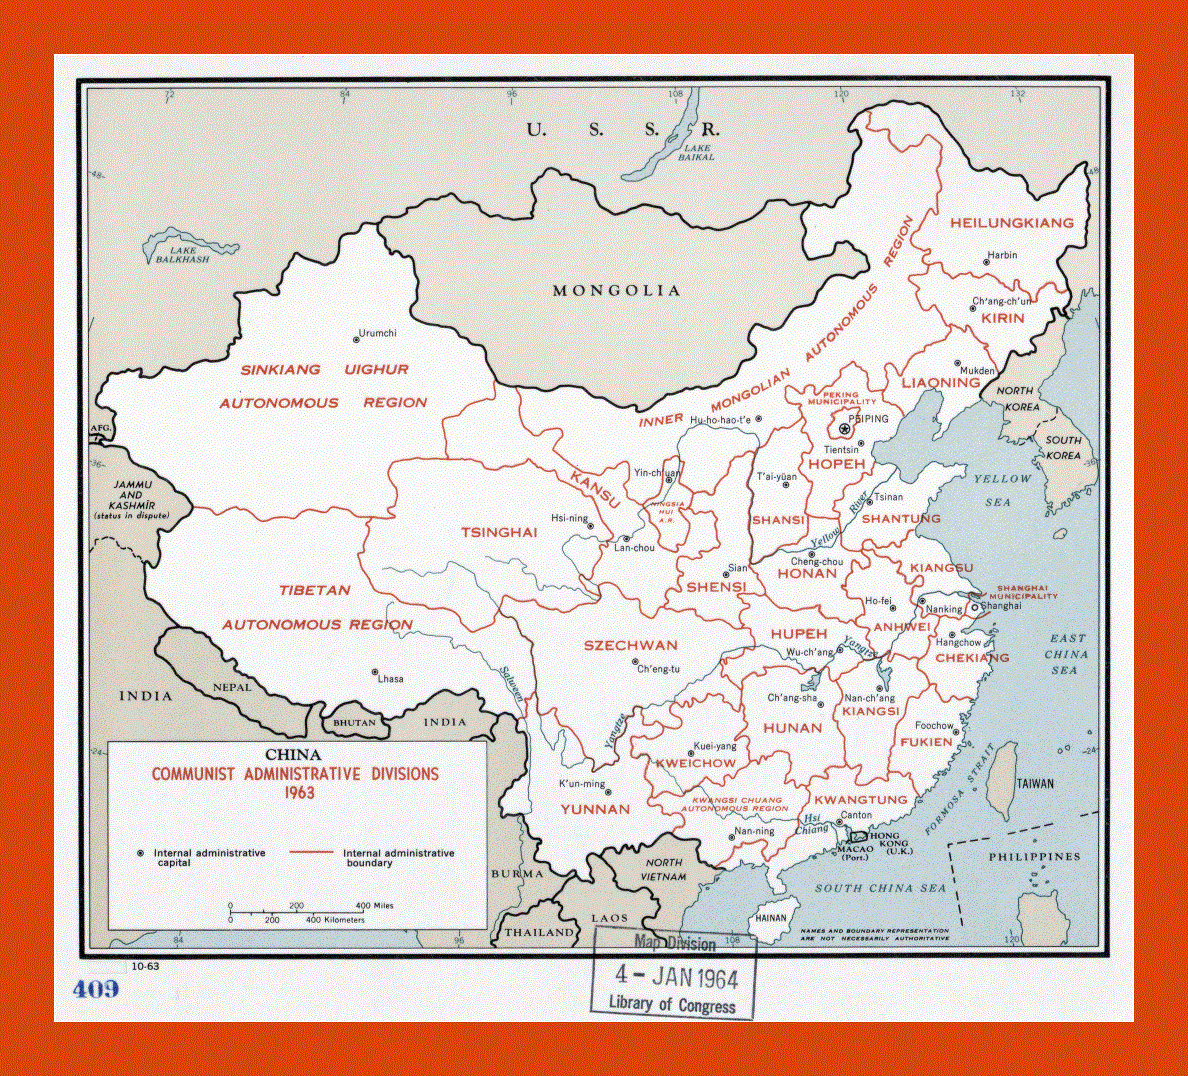 China Communist Administrative Divisions map - 1963